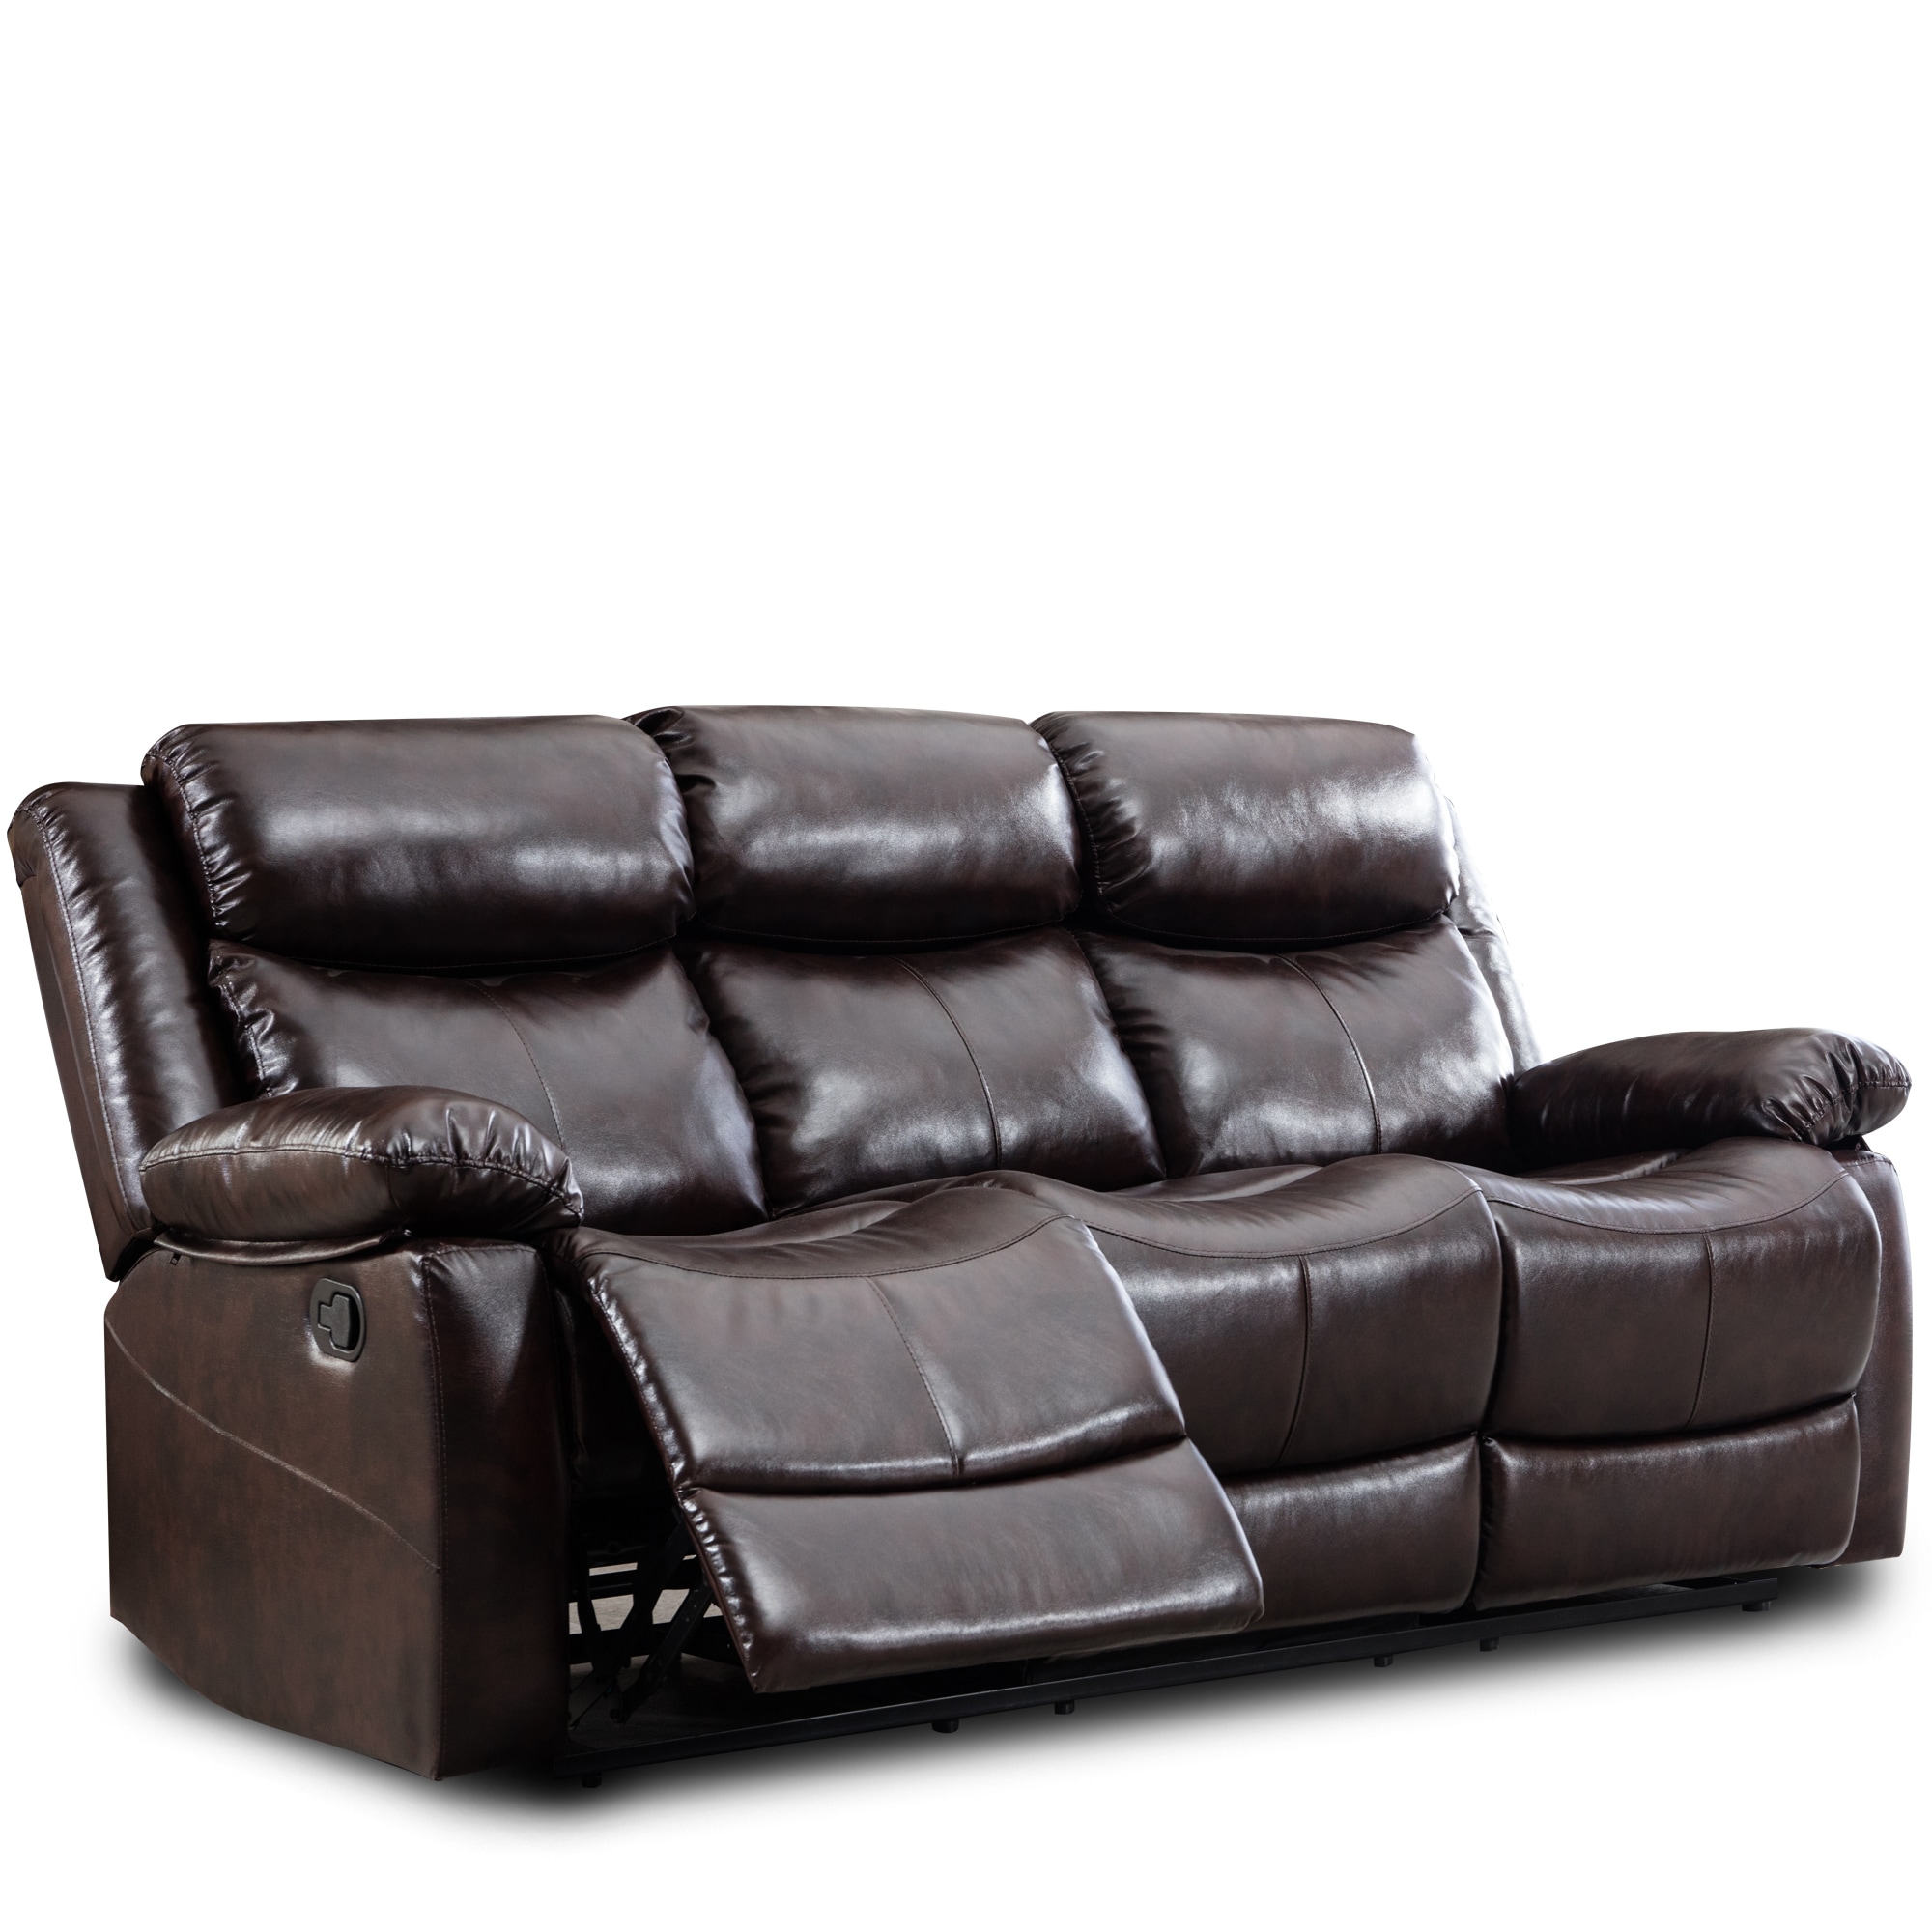 Casainc Brown Pu Leather Sectional, Brown Leather Couch And Loveseat